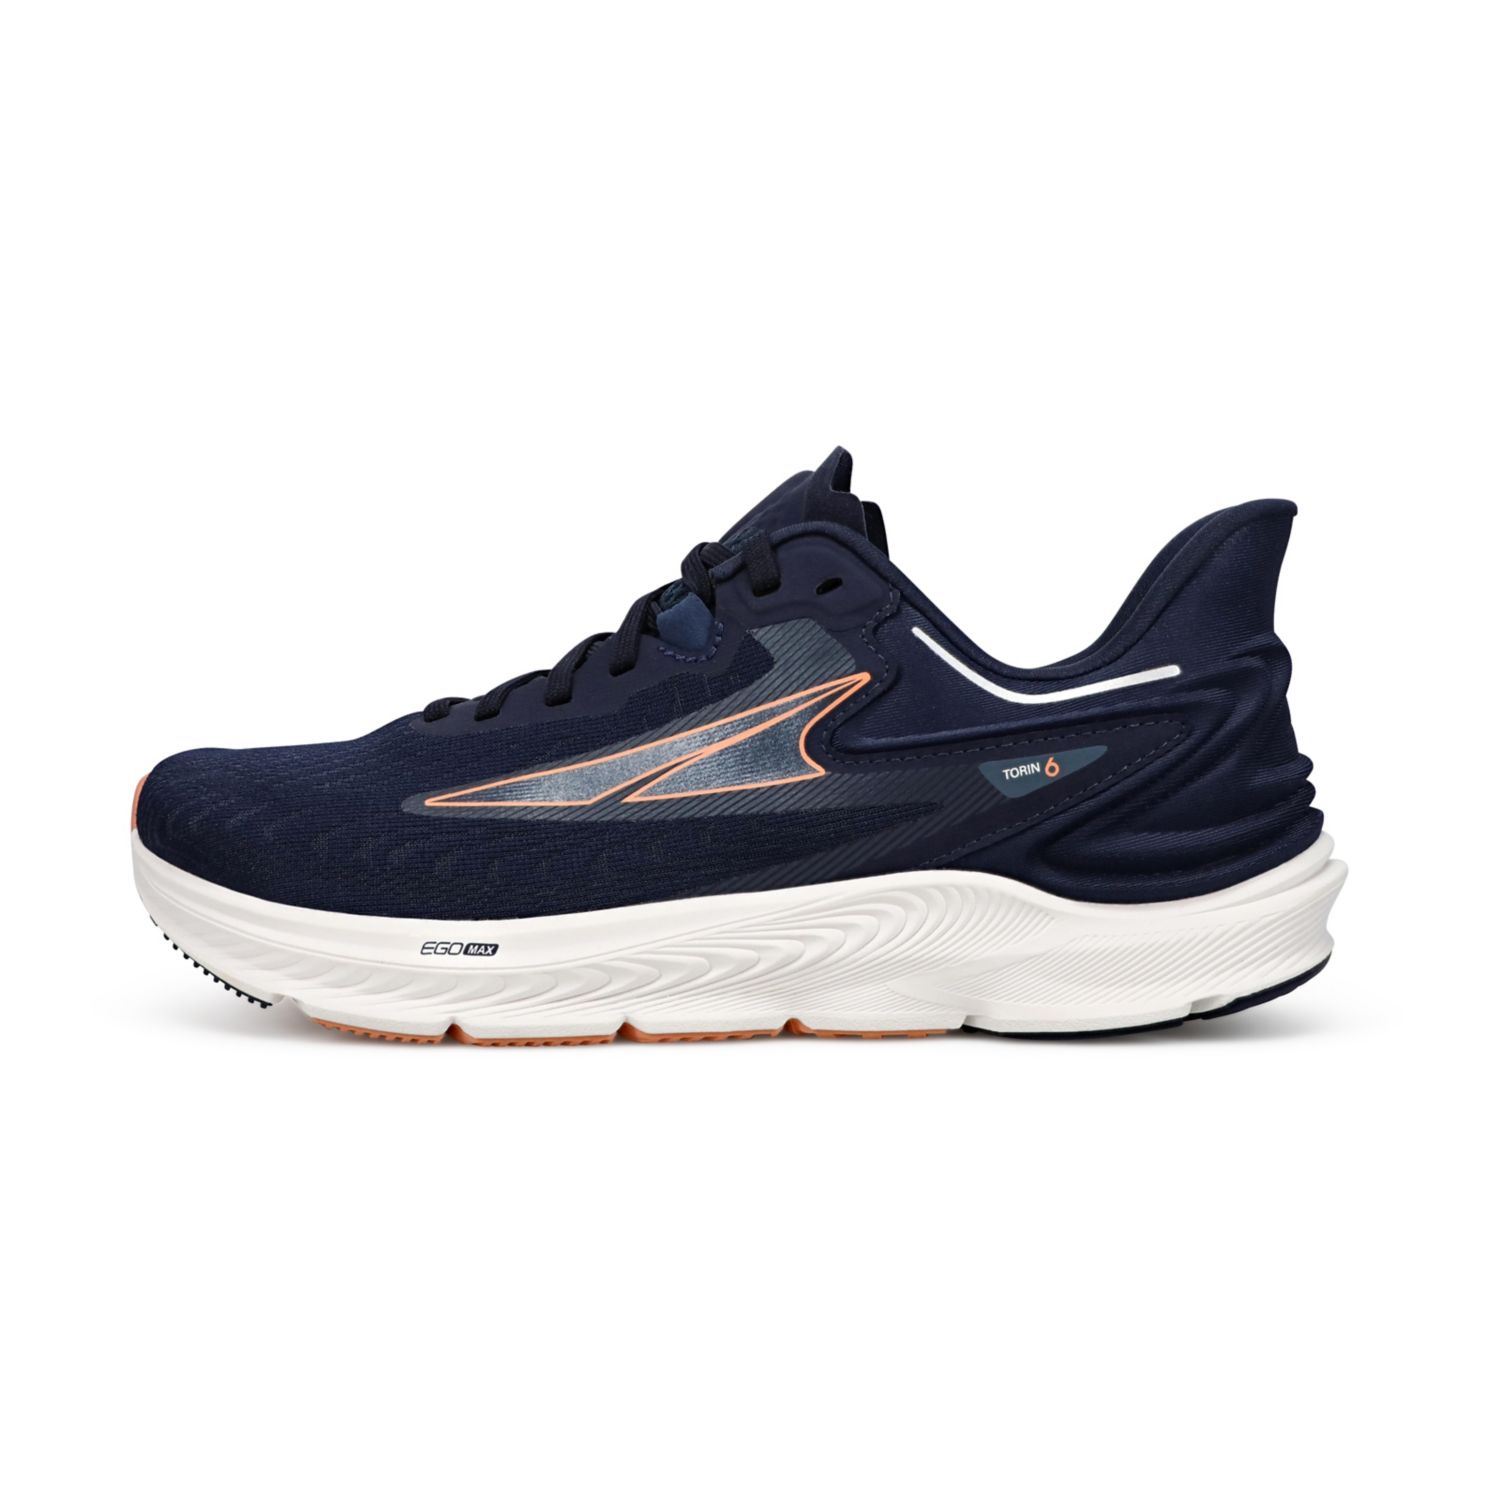 Navy / Coral Altra Torin 6 Women's Road Running Shoes | Ireland-18079539